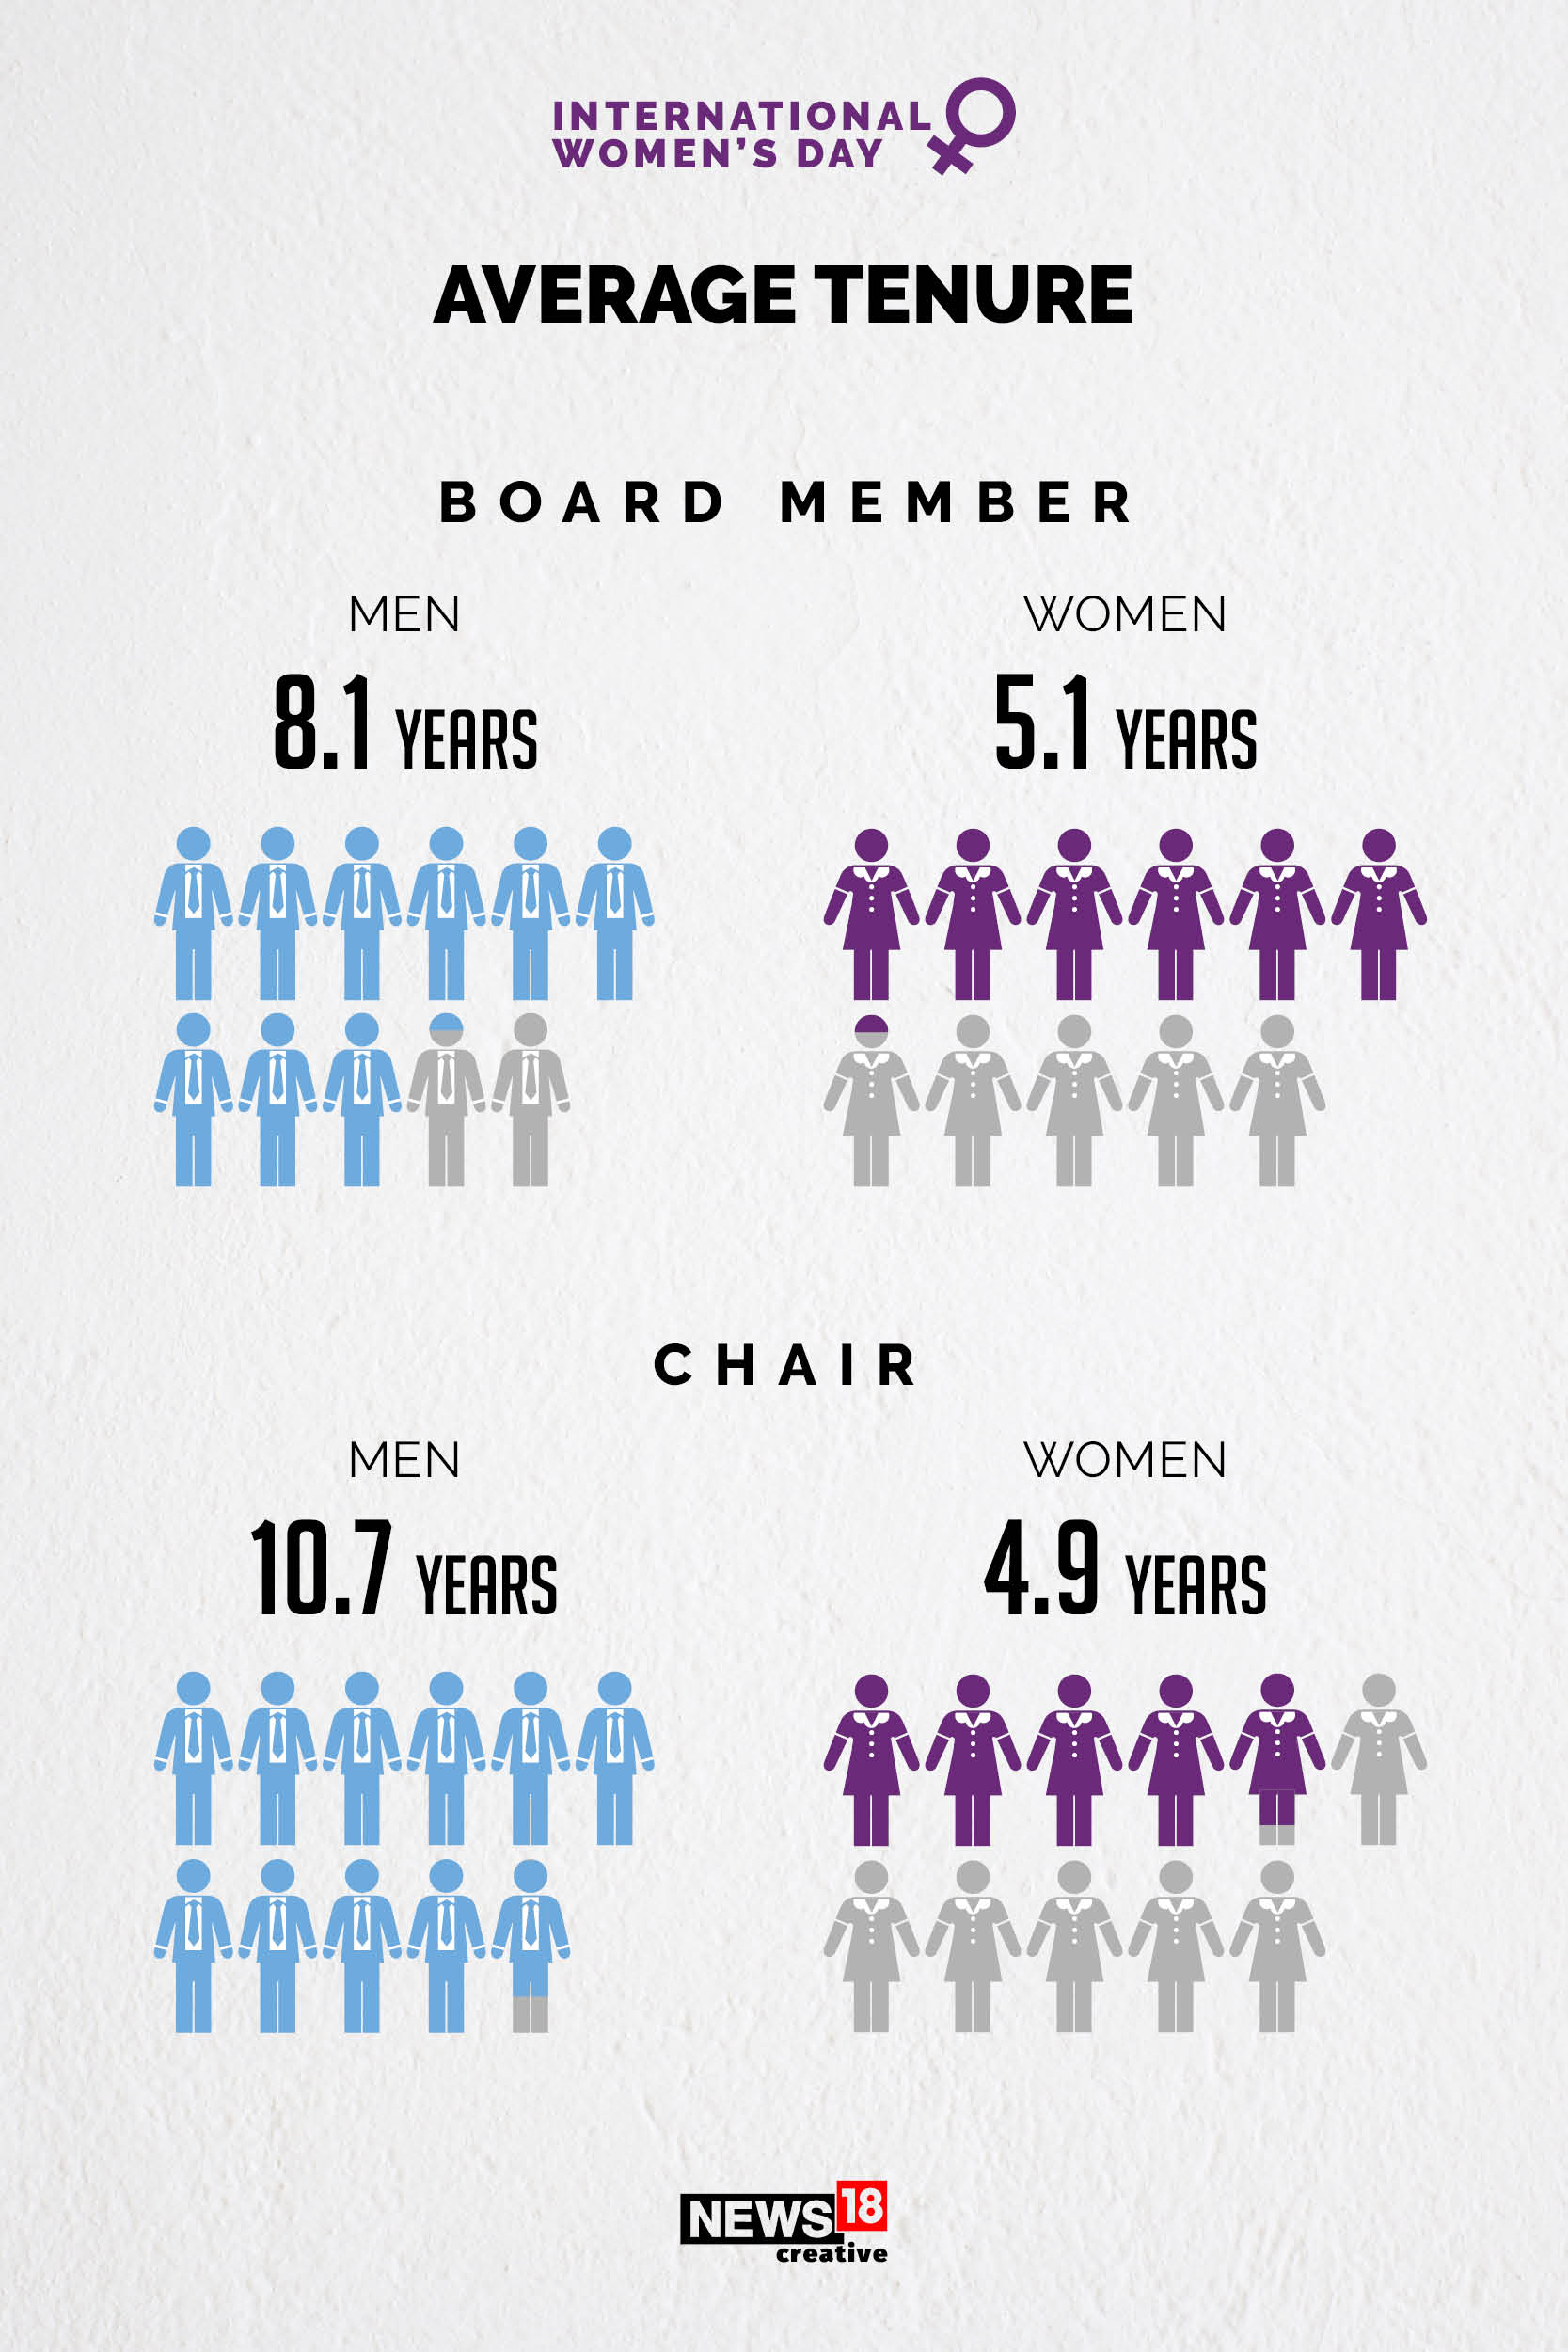 Women are taking up more leadership roles but not in the boardroom